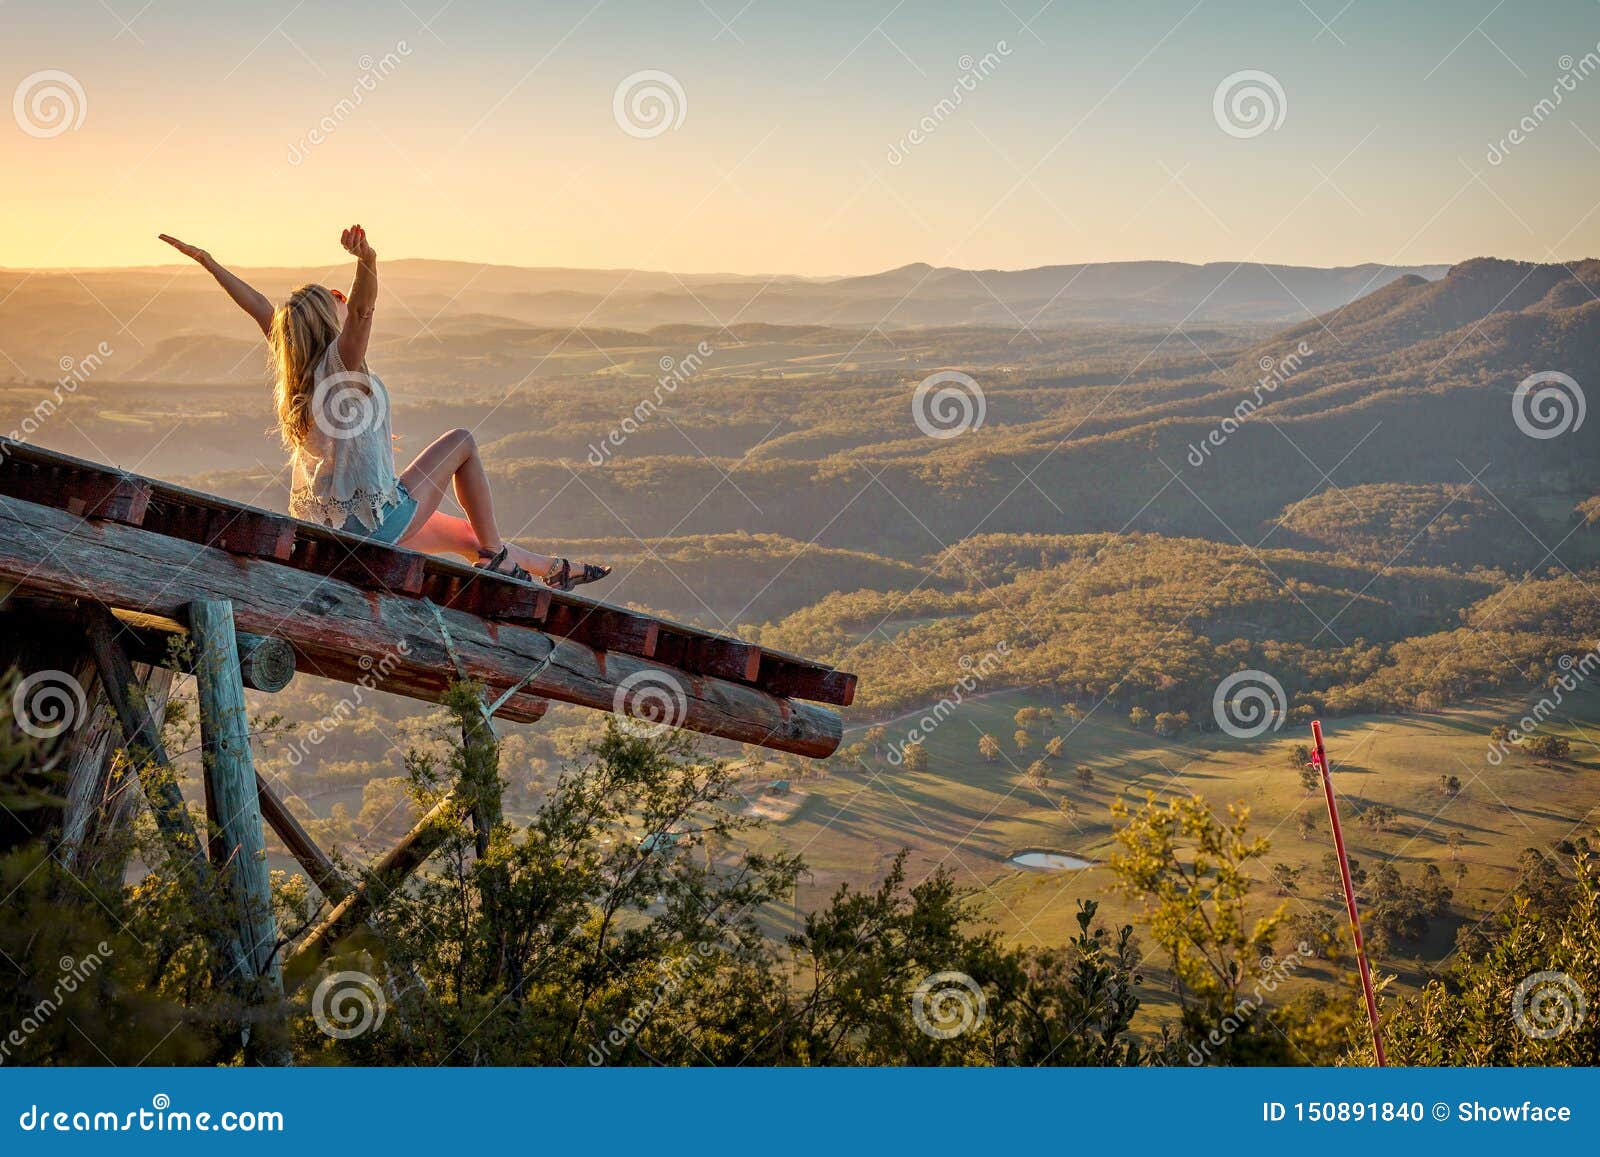 freedom loving woman feeling exhilaration on ramp high above the valley